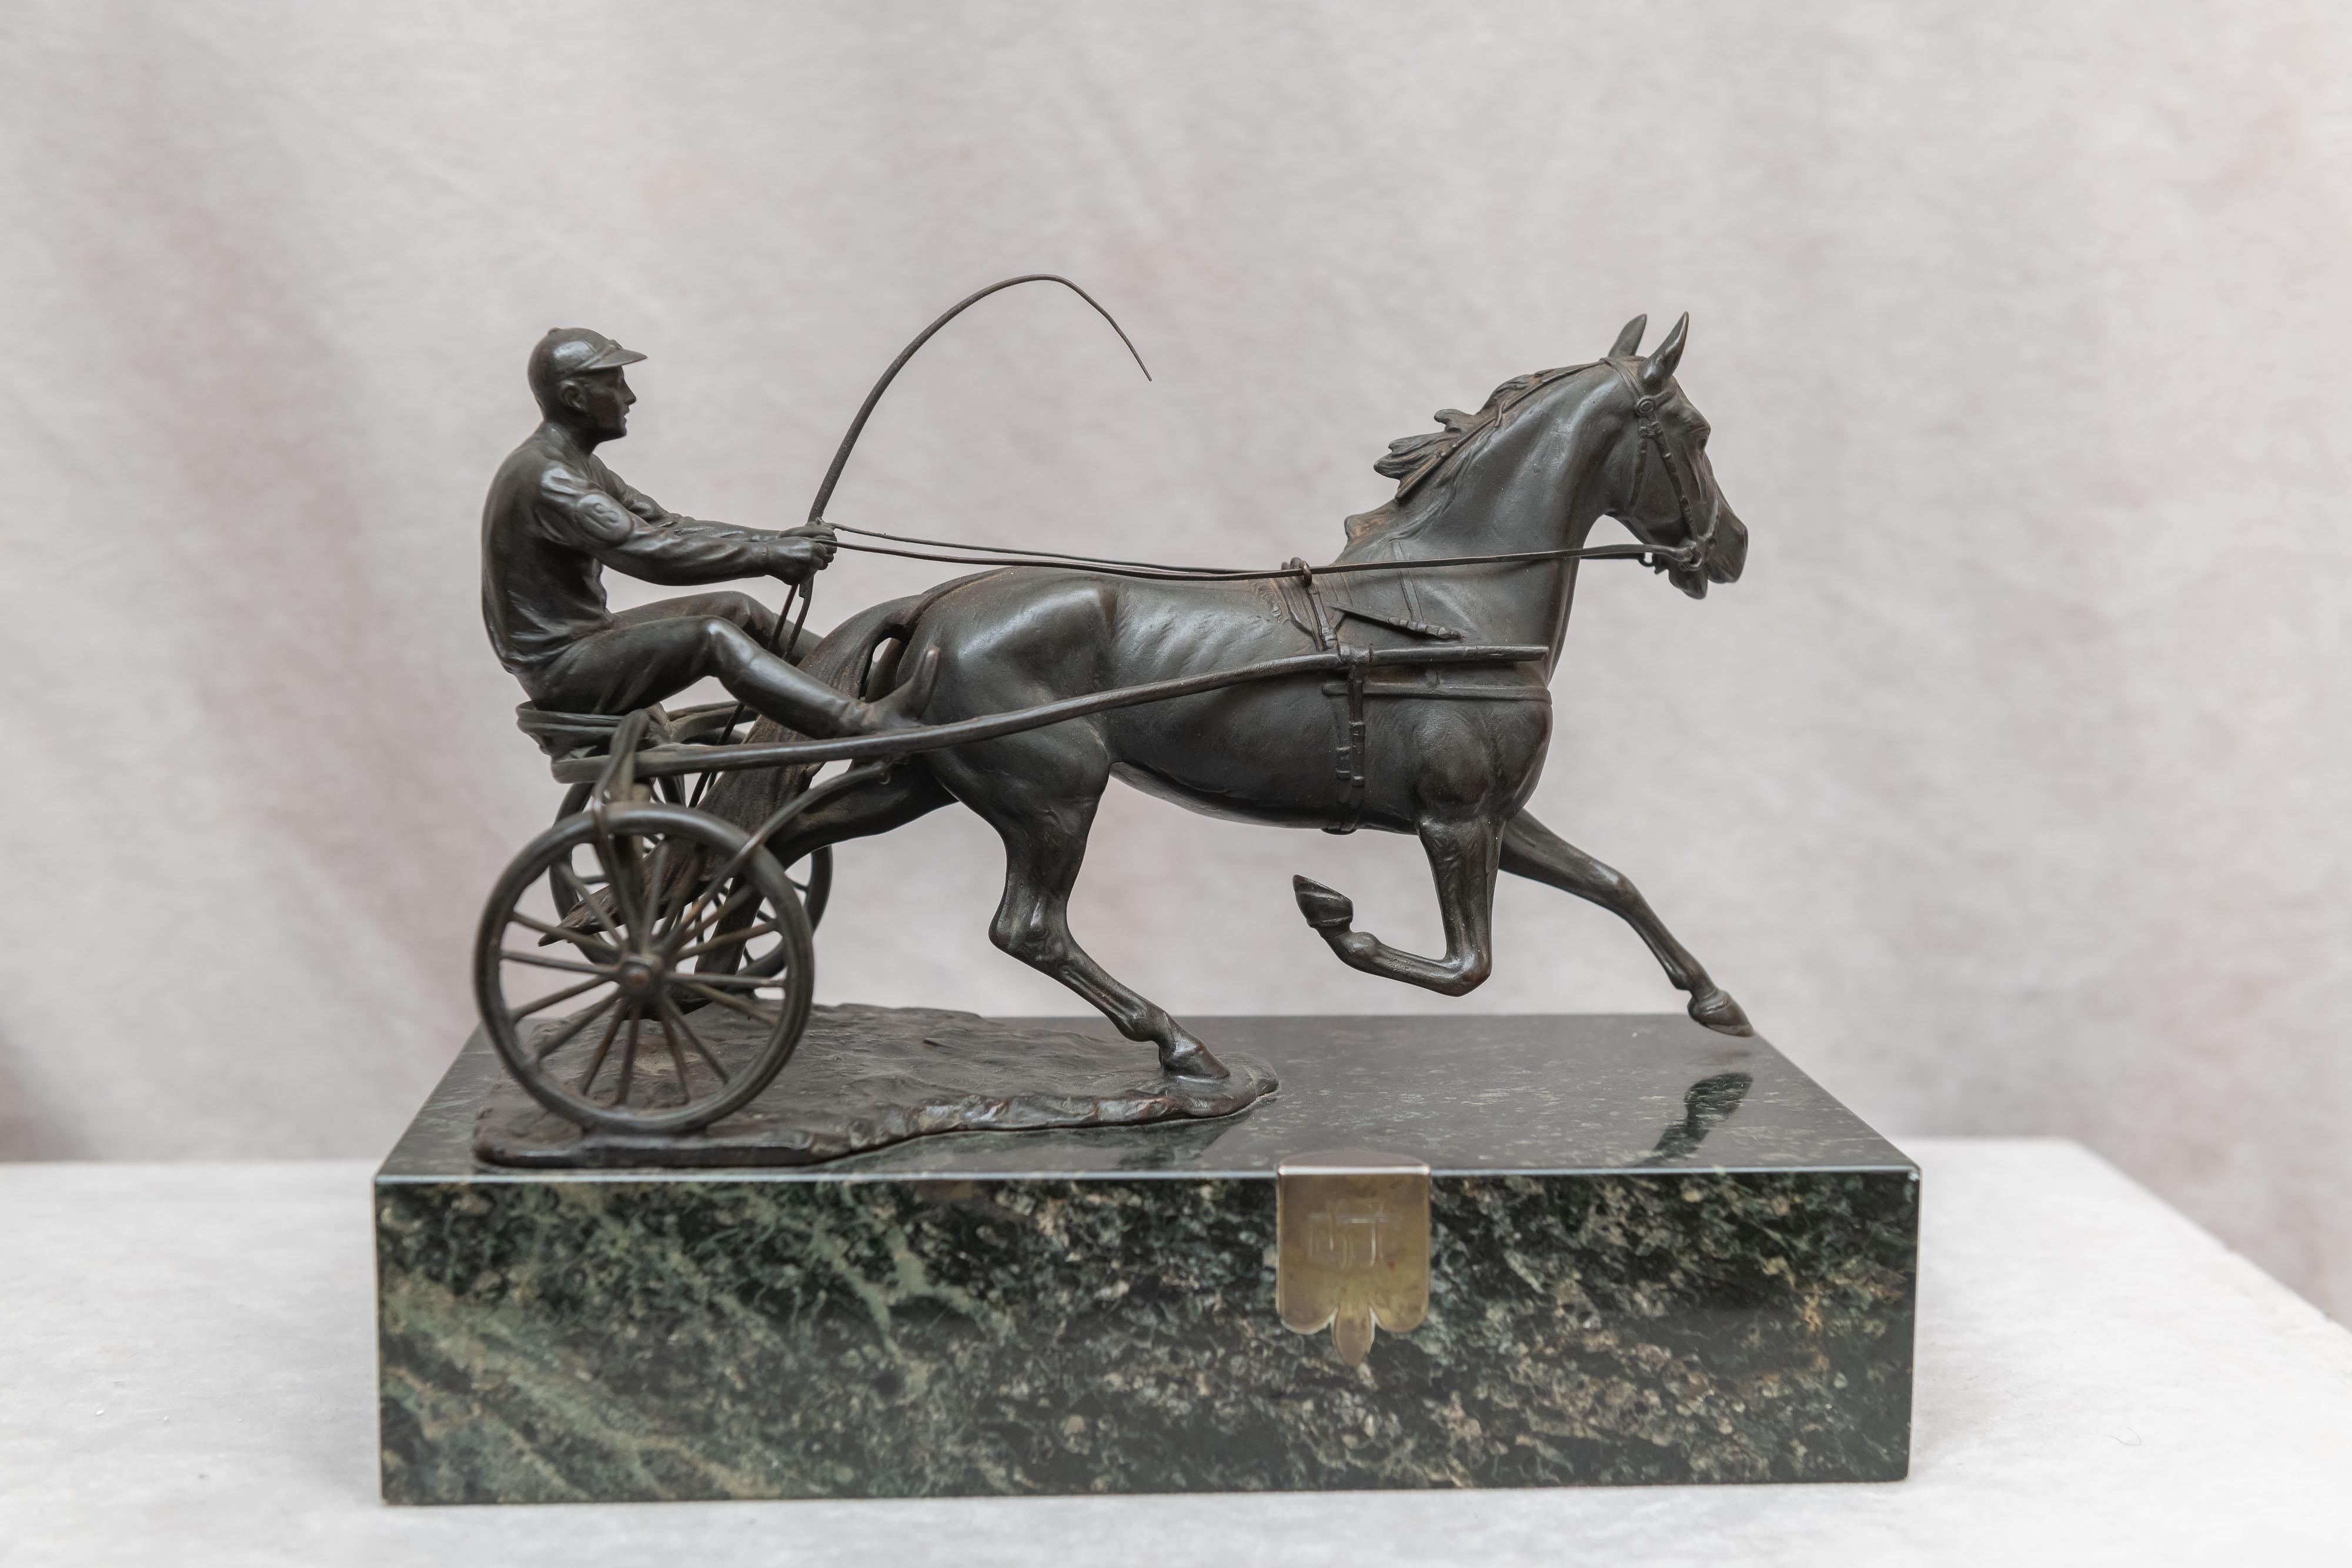 Being bronze dealers for over 40 years we are always on the lookout for horses, because they are beautiful, graceful animals, and people love them. We often get jockeys on horses, but I can't remember one single harness racer and driver that we have